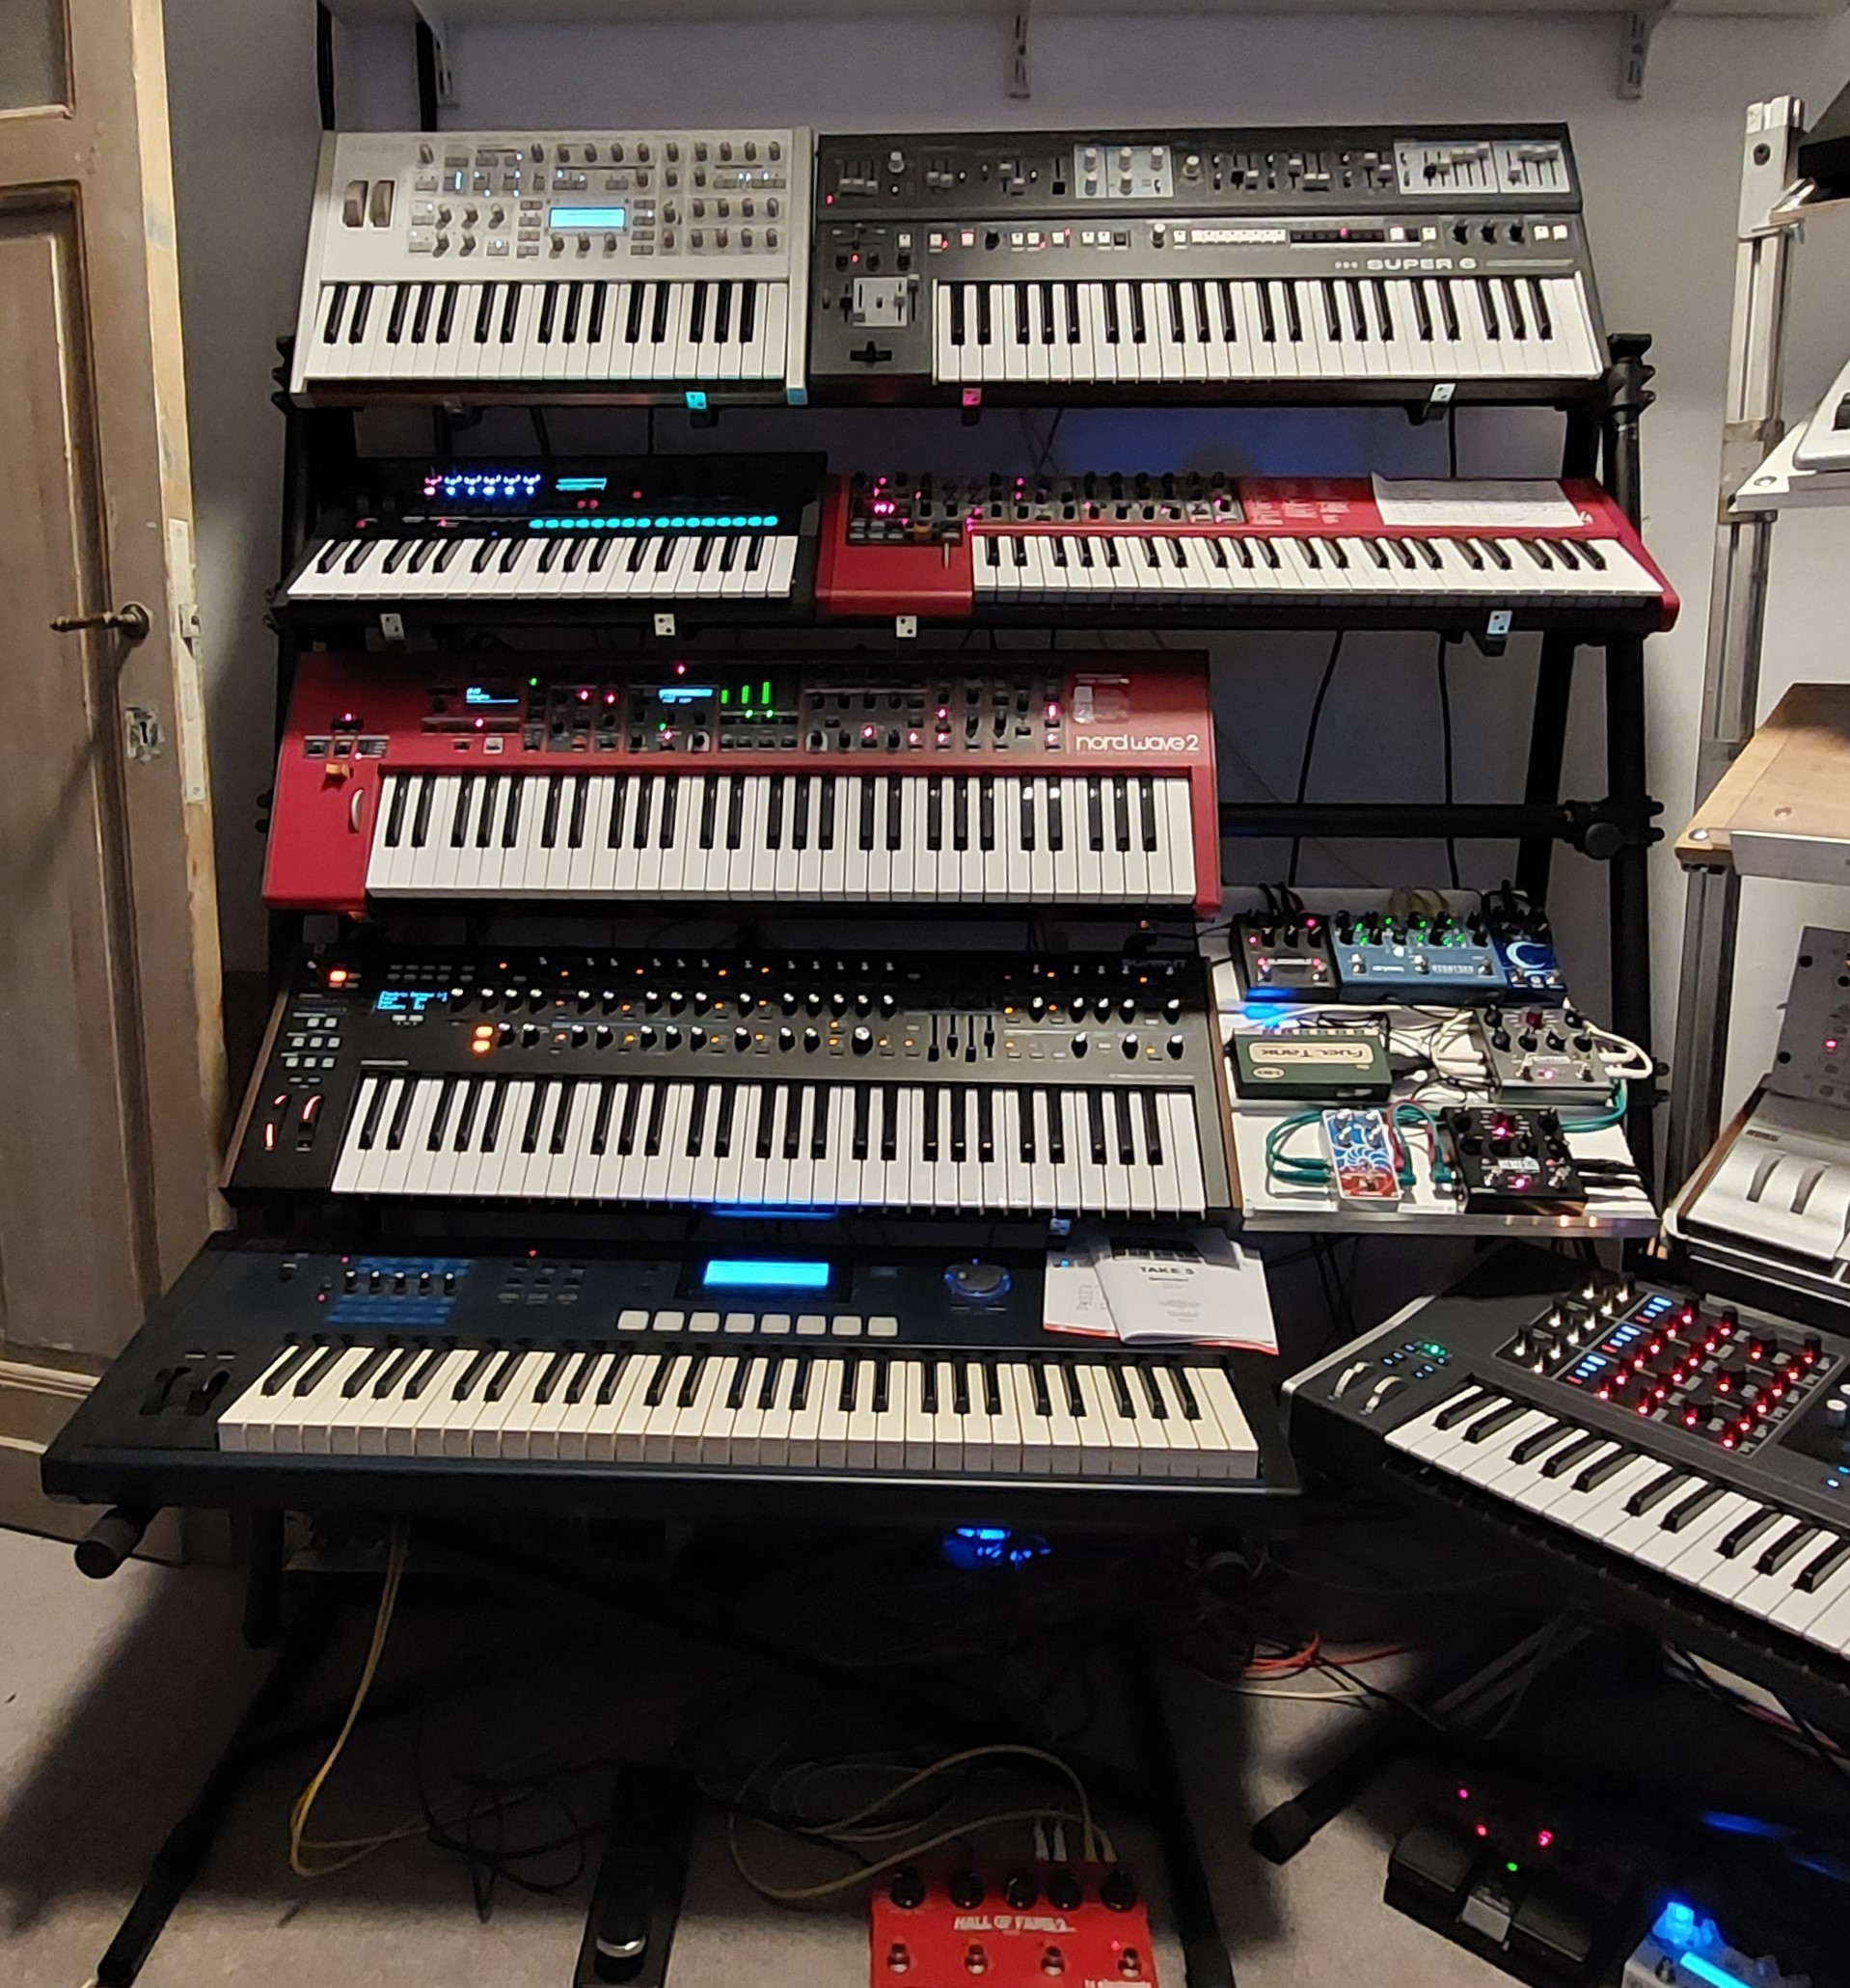 From top to bottom: Virus Indigo, UDO super 6, Korg OPSIX, Nord lead 4, Nord Wave 2, Novation Summit, Kurzweil PC